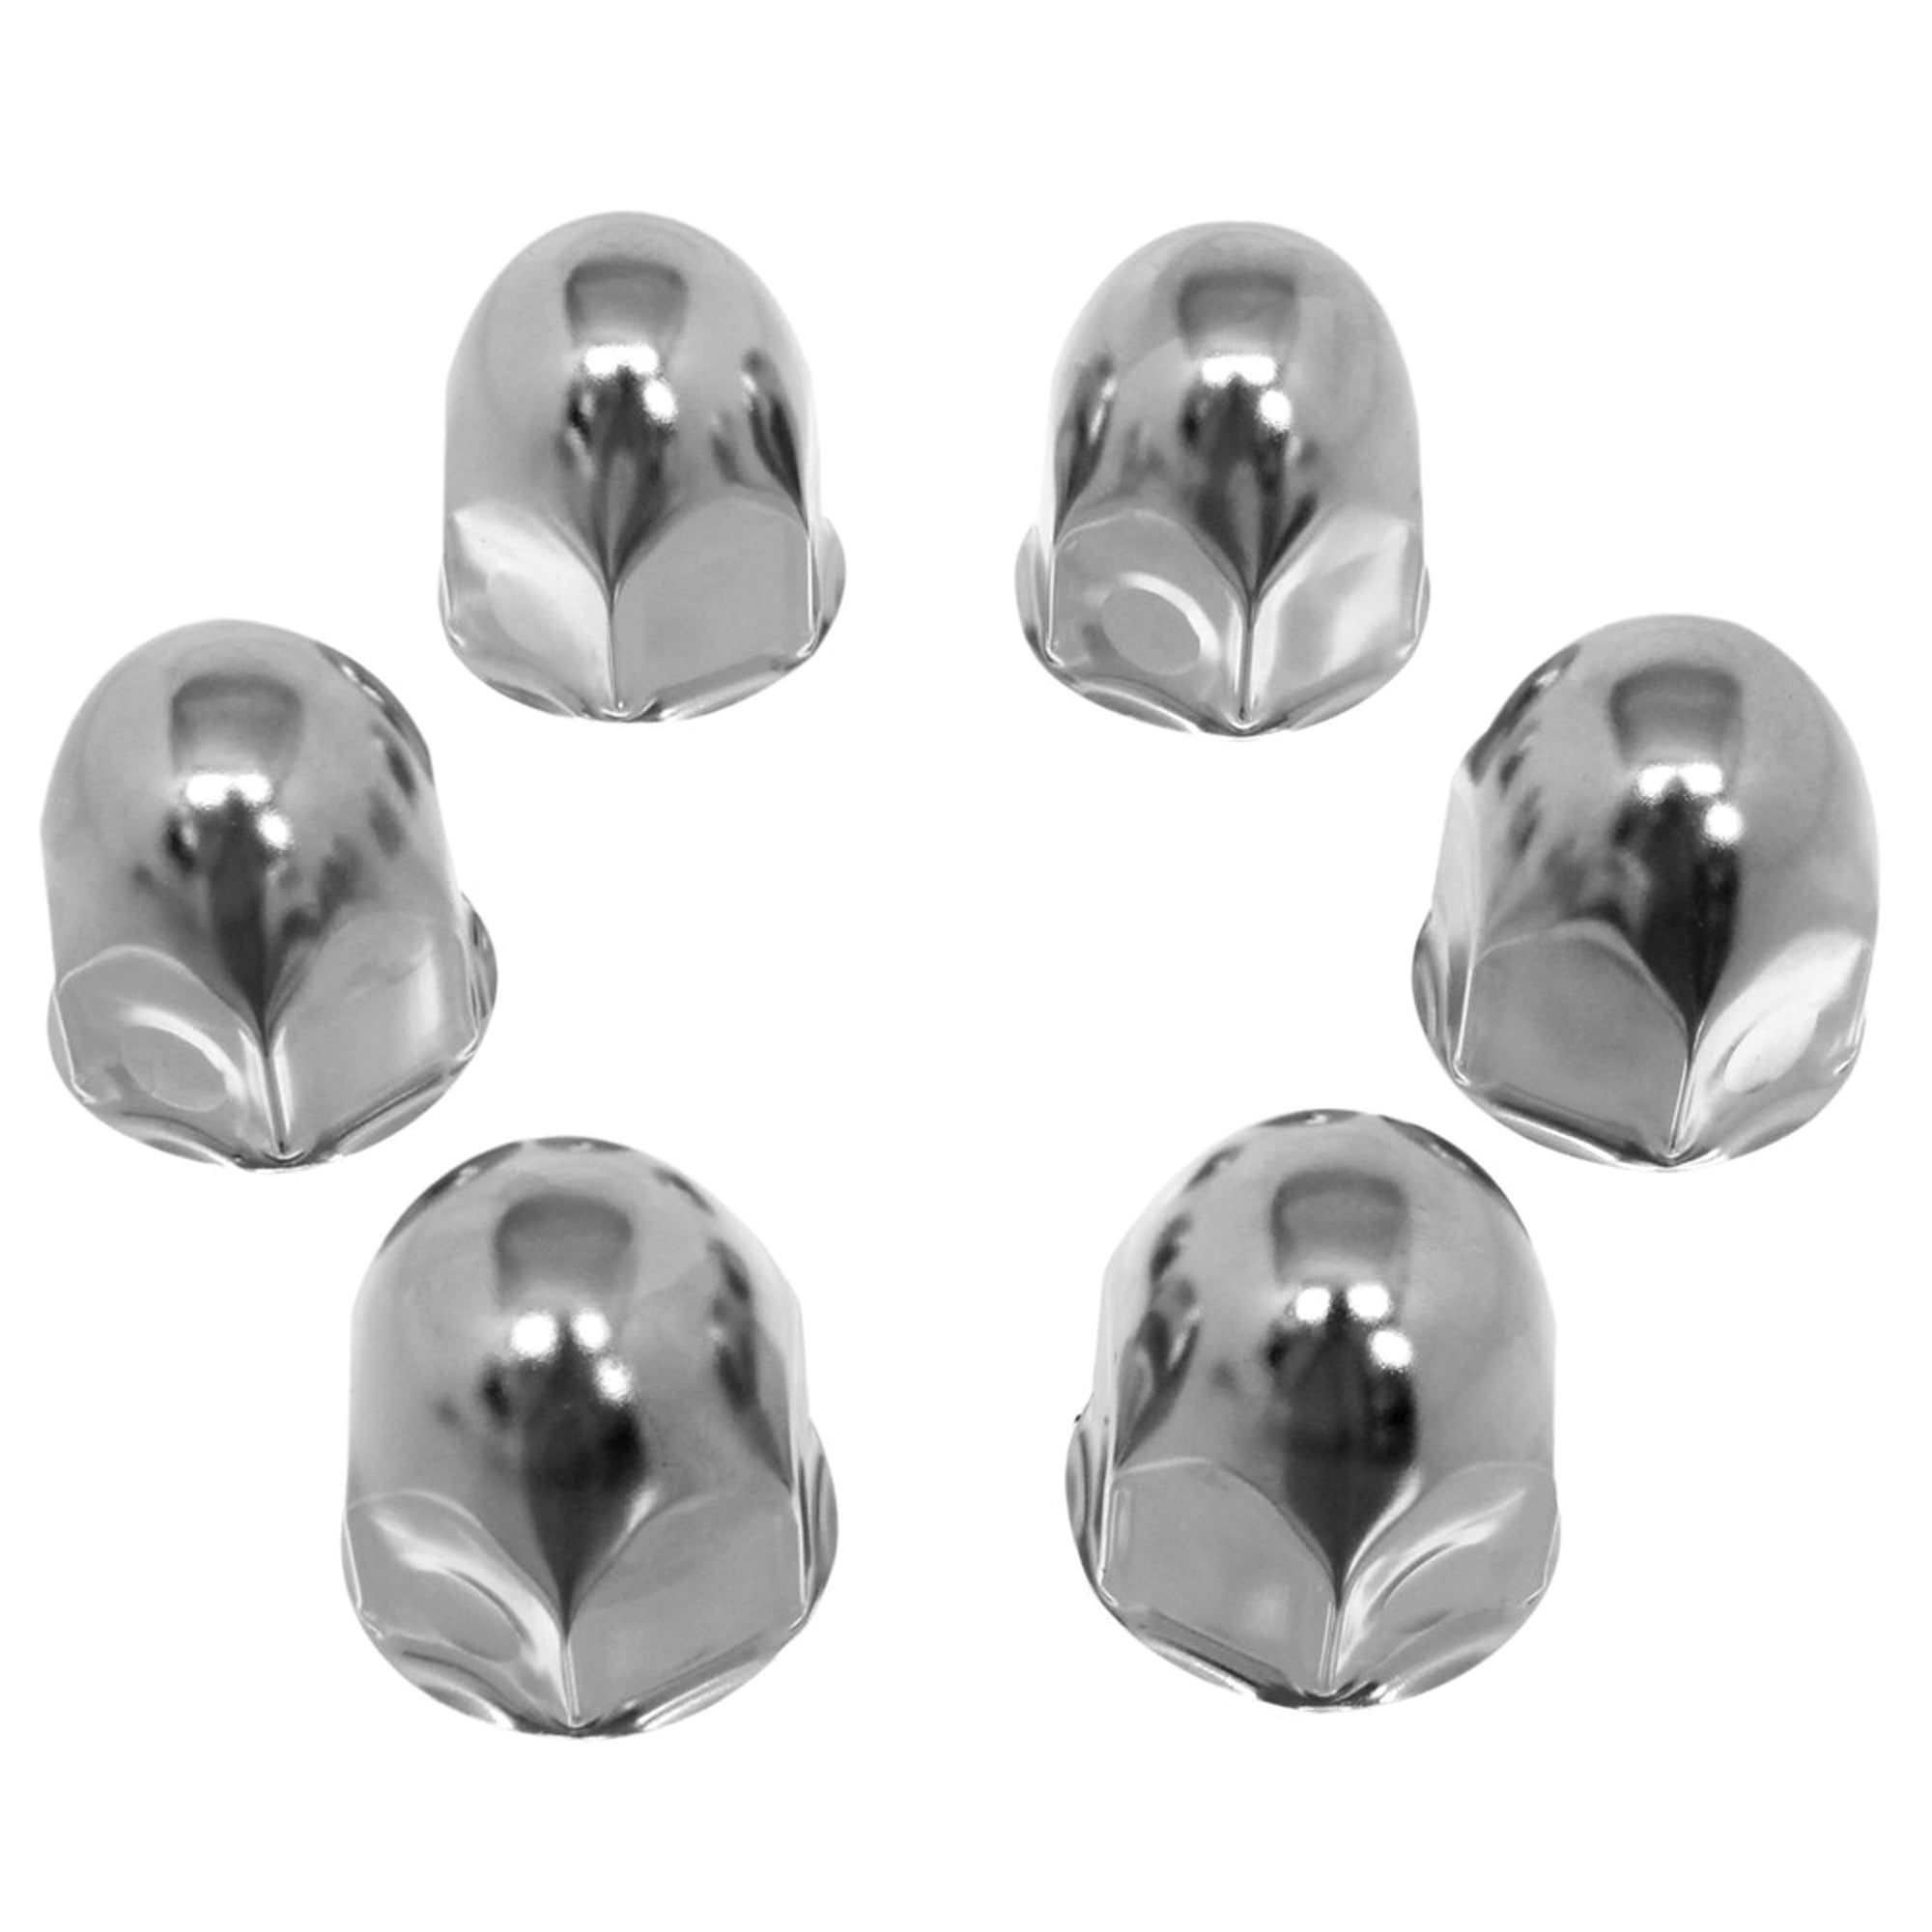 Wheel Masters 8012 Stainless Steel Lug Nut Cover - 1-1/2" Truck, Pack of 6